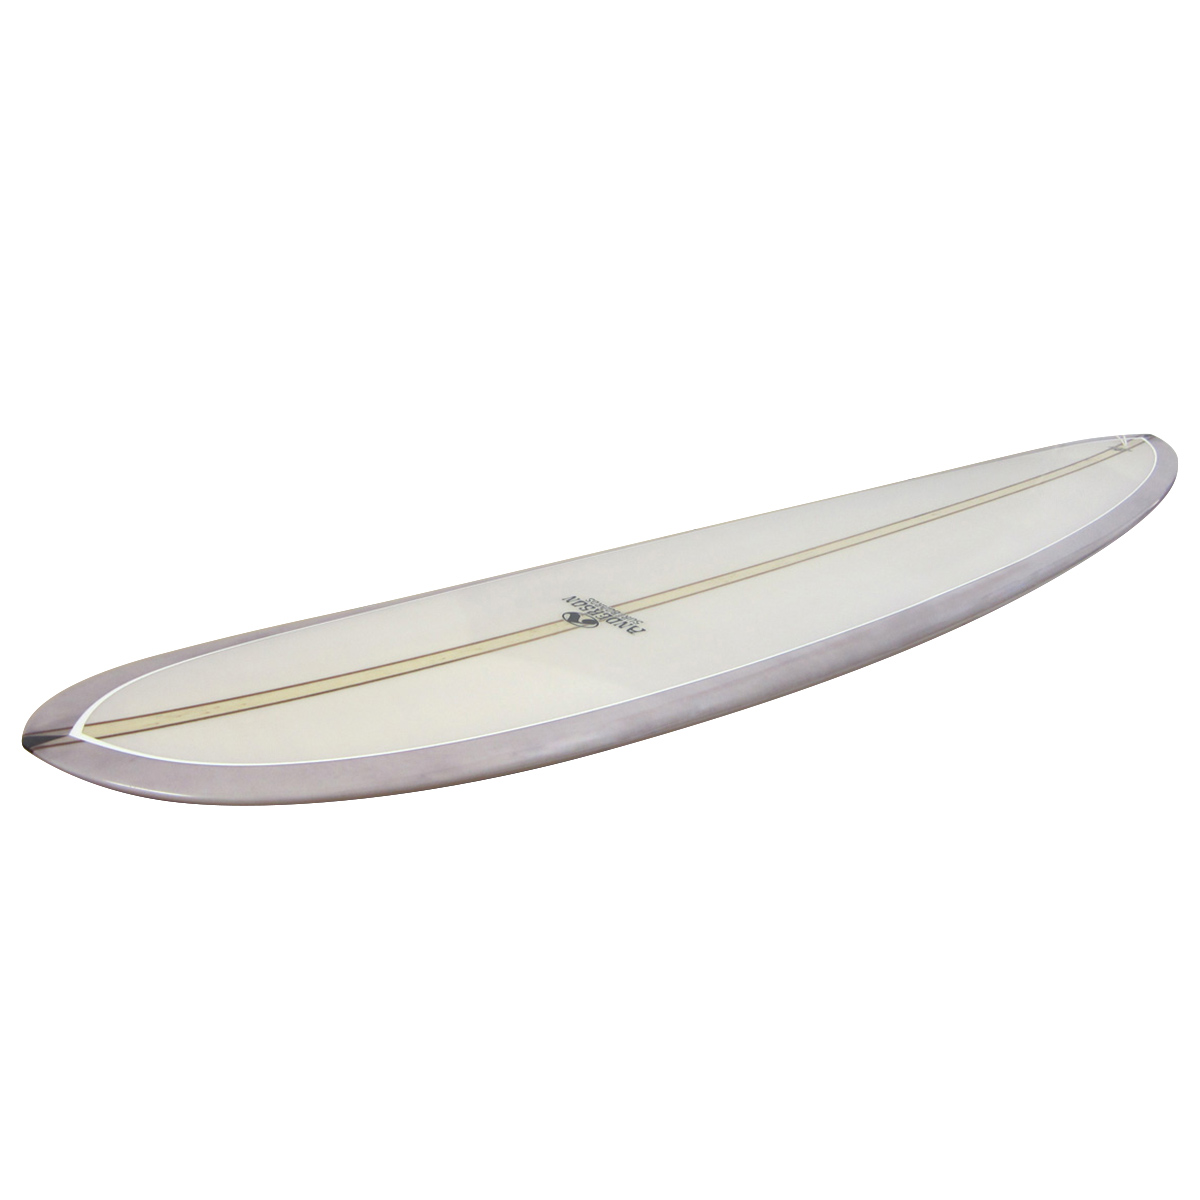 Anderson Surfboards / FARBEROW 1 MODEL 9`4